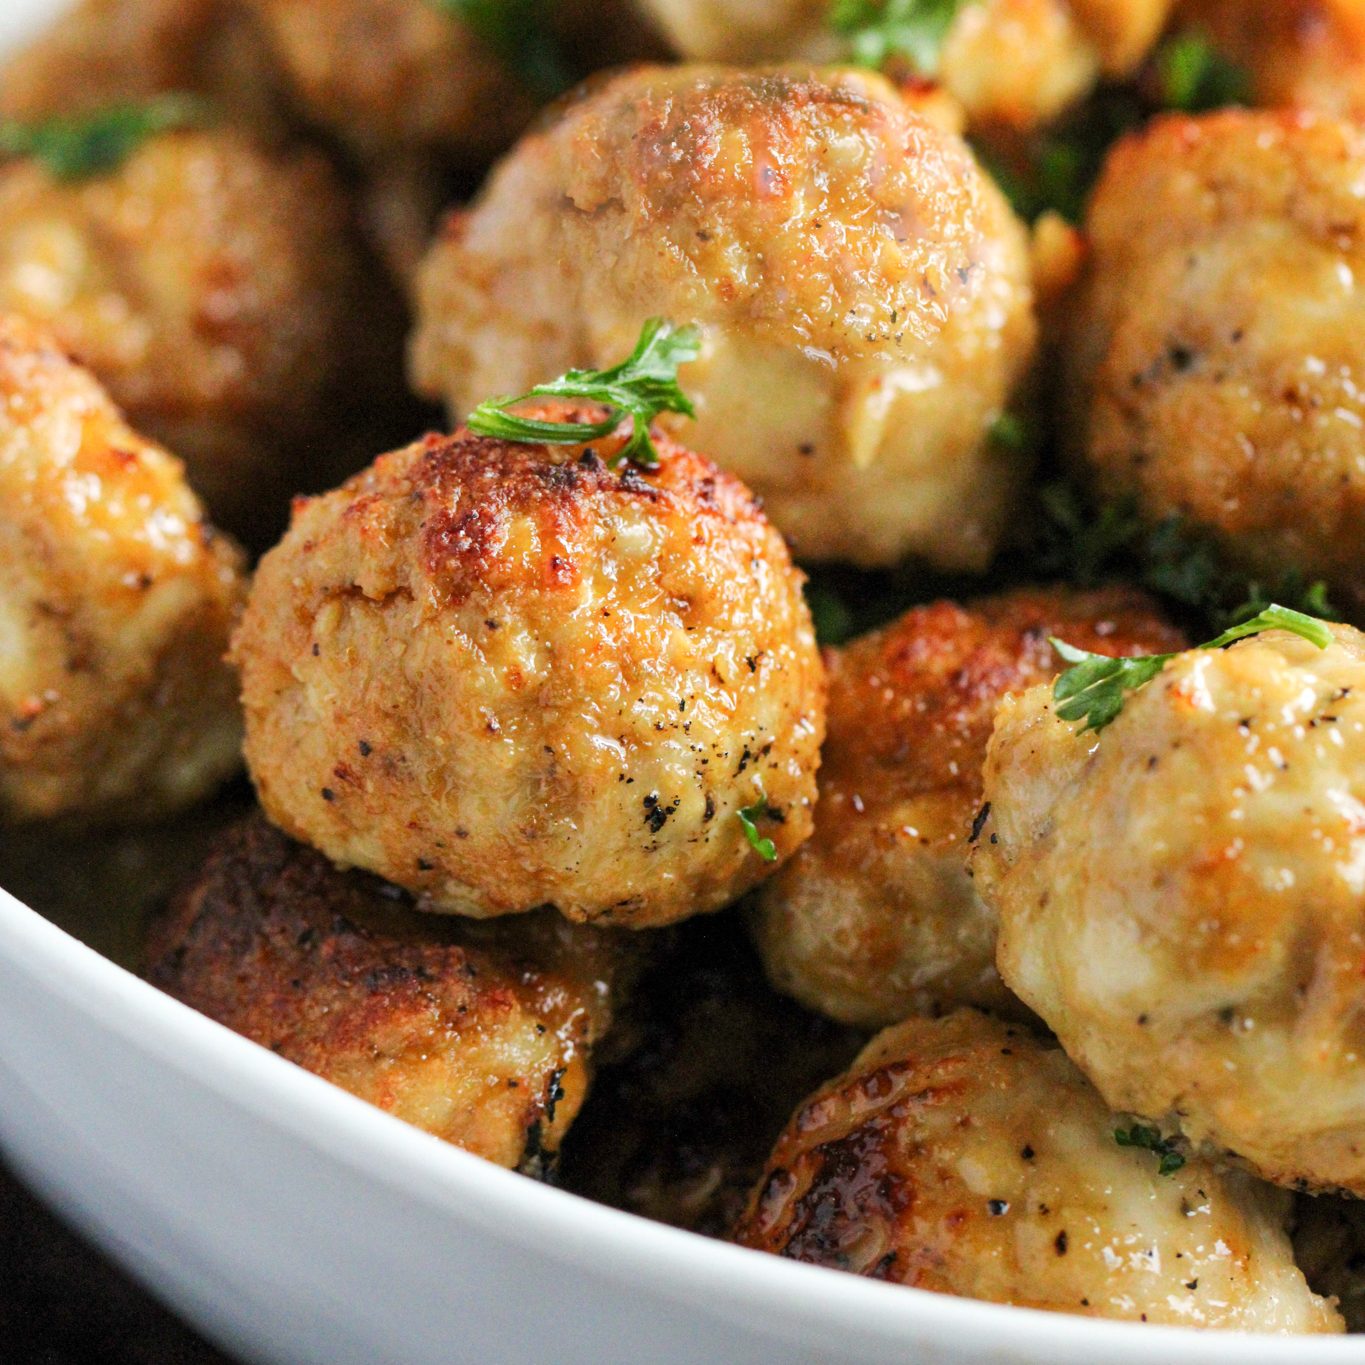 Whole30 Chicken Meatballs - Paleo, gluten-free, dairy-free, keto, with nut-free and egg-free options. Air fryer or oven, freezer friendly.